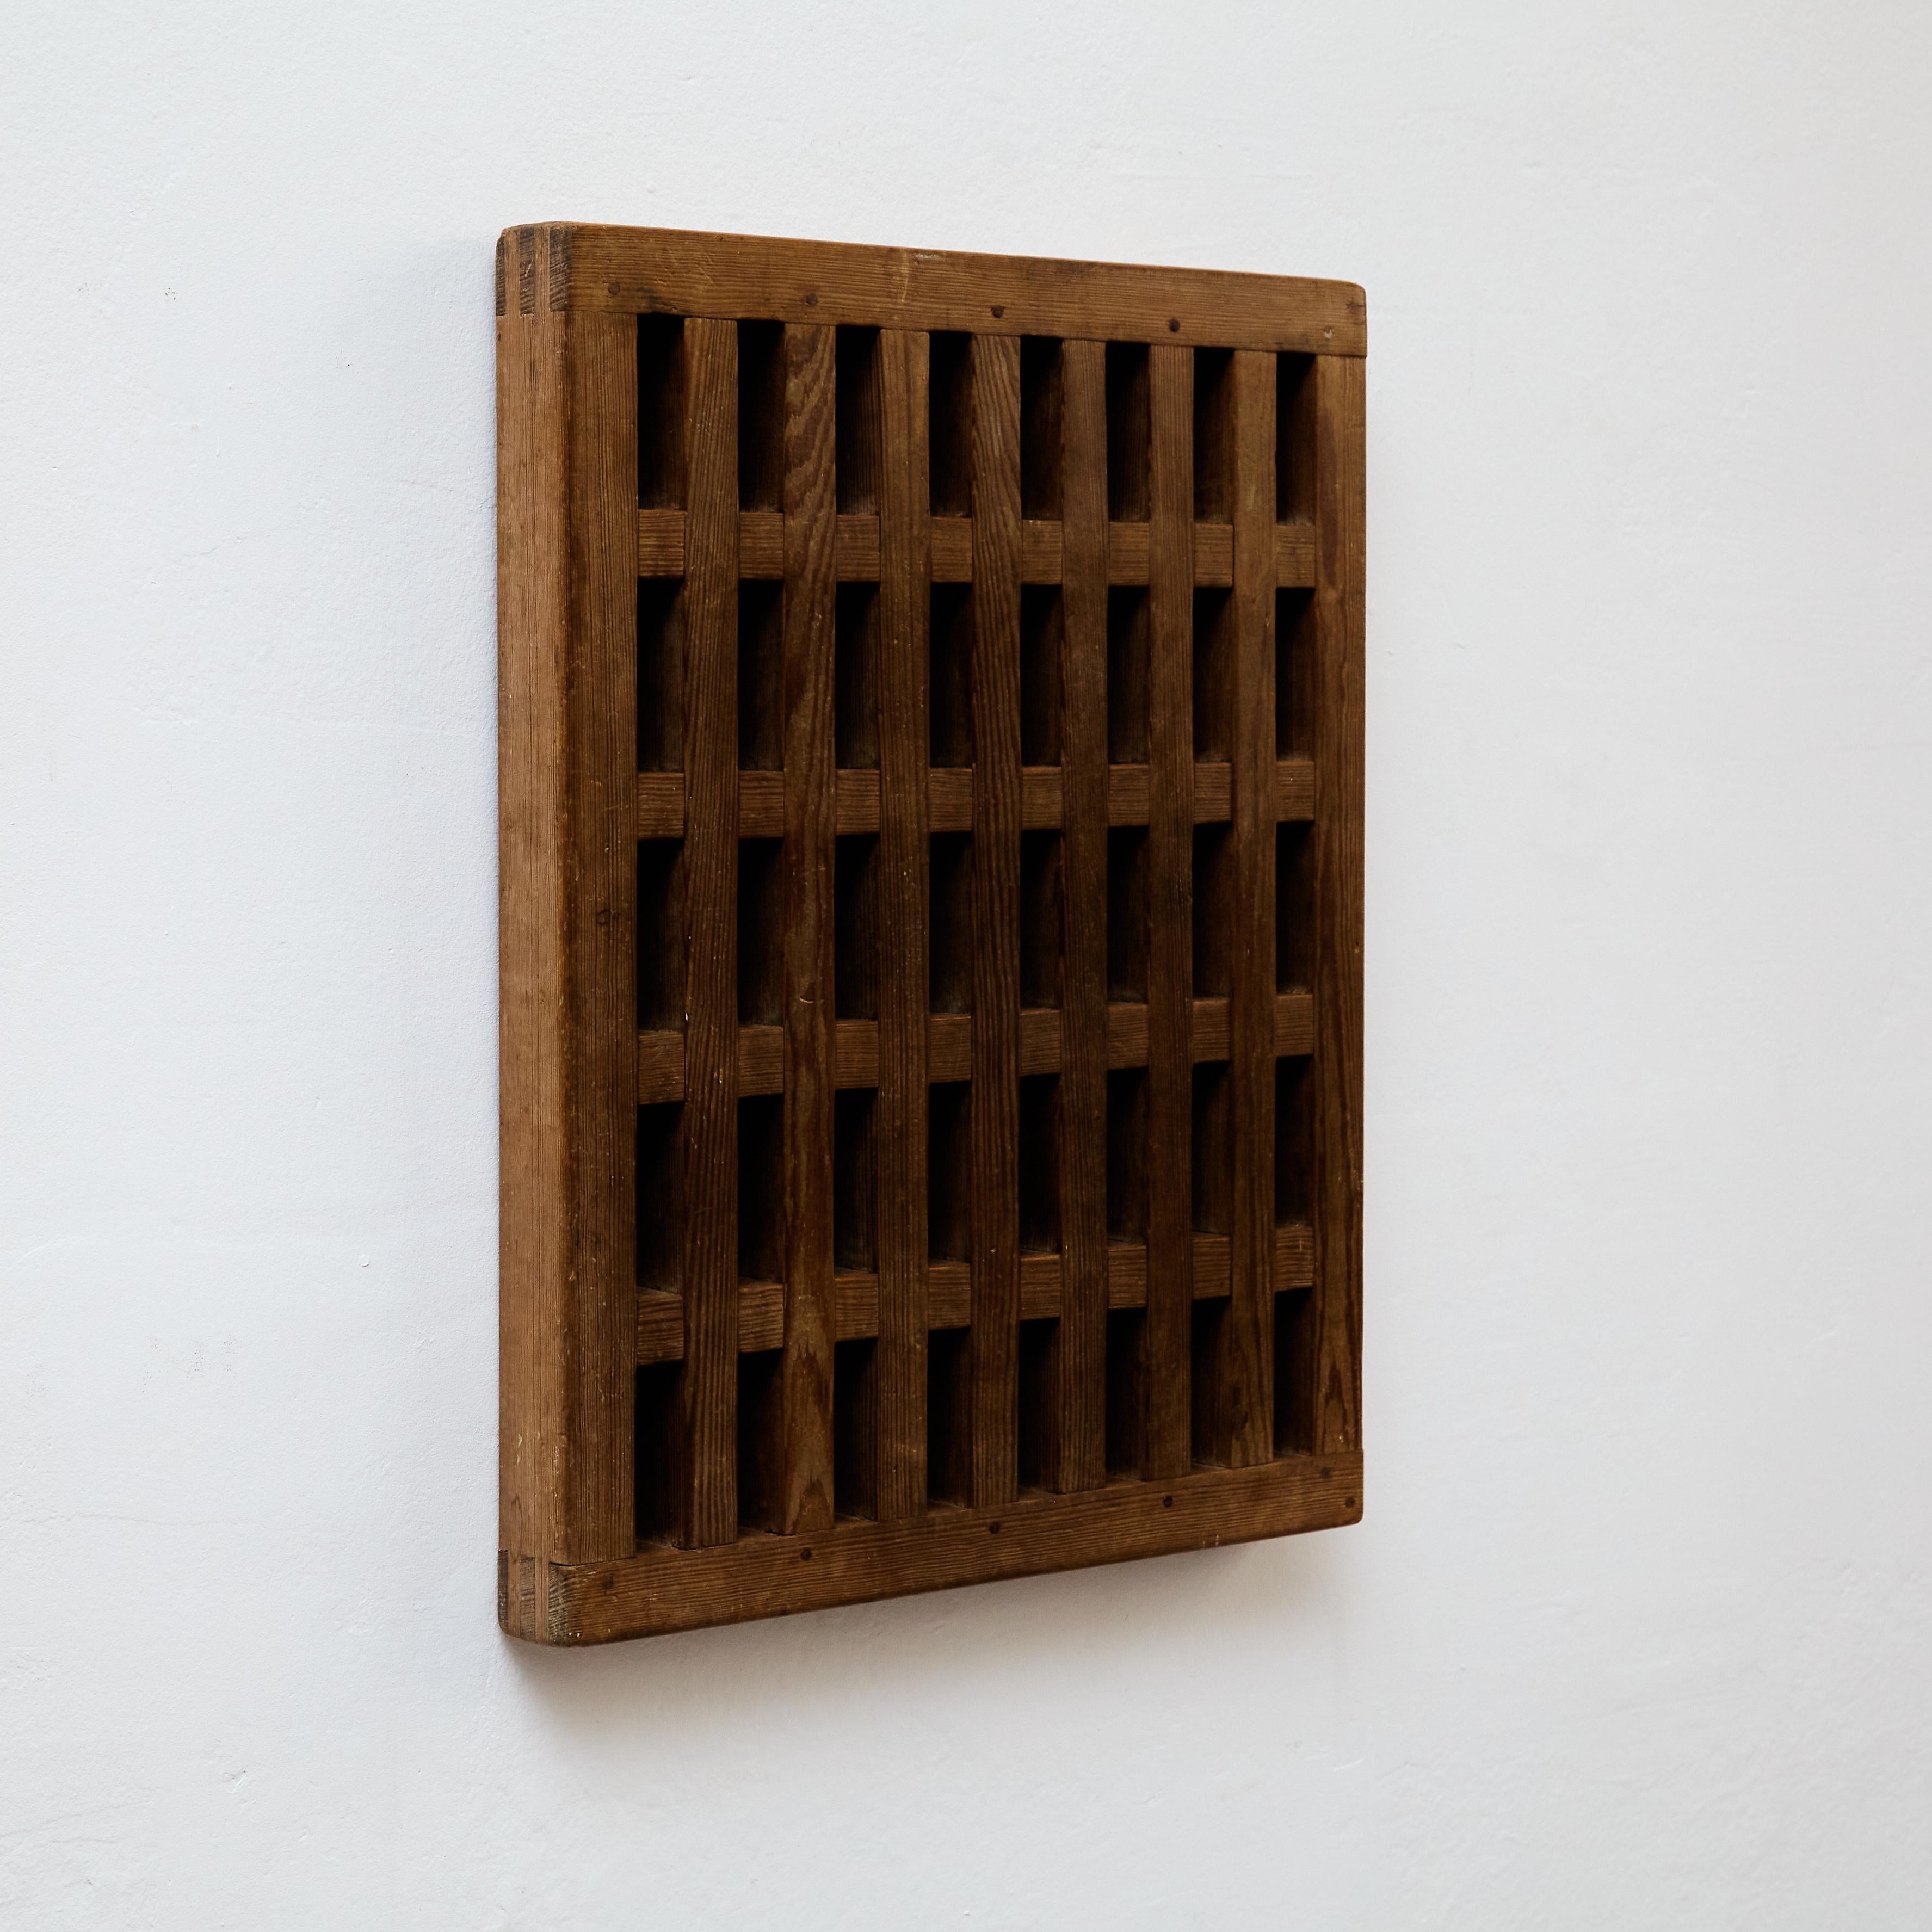 Wall Rationalist Wooden Decoration.

Manufactured in France, circa 1960.

In original condition with minor wear consistent of age and use, preserving a beautiful patina.

Materials: 
Wood 

Dimensions: 
D 5.5 cm x W 46 cm x H